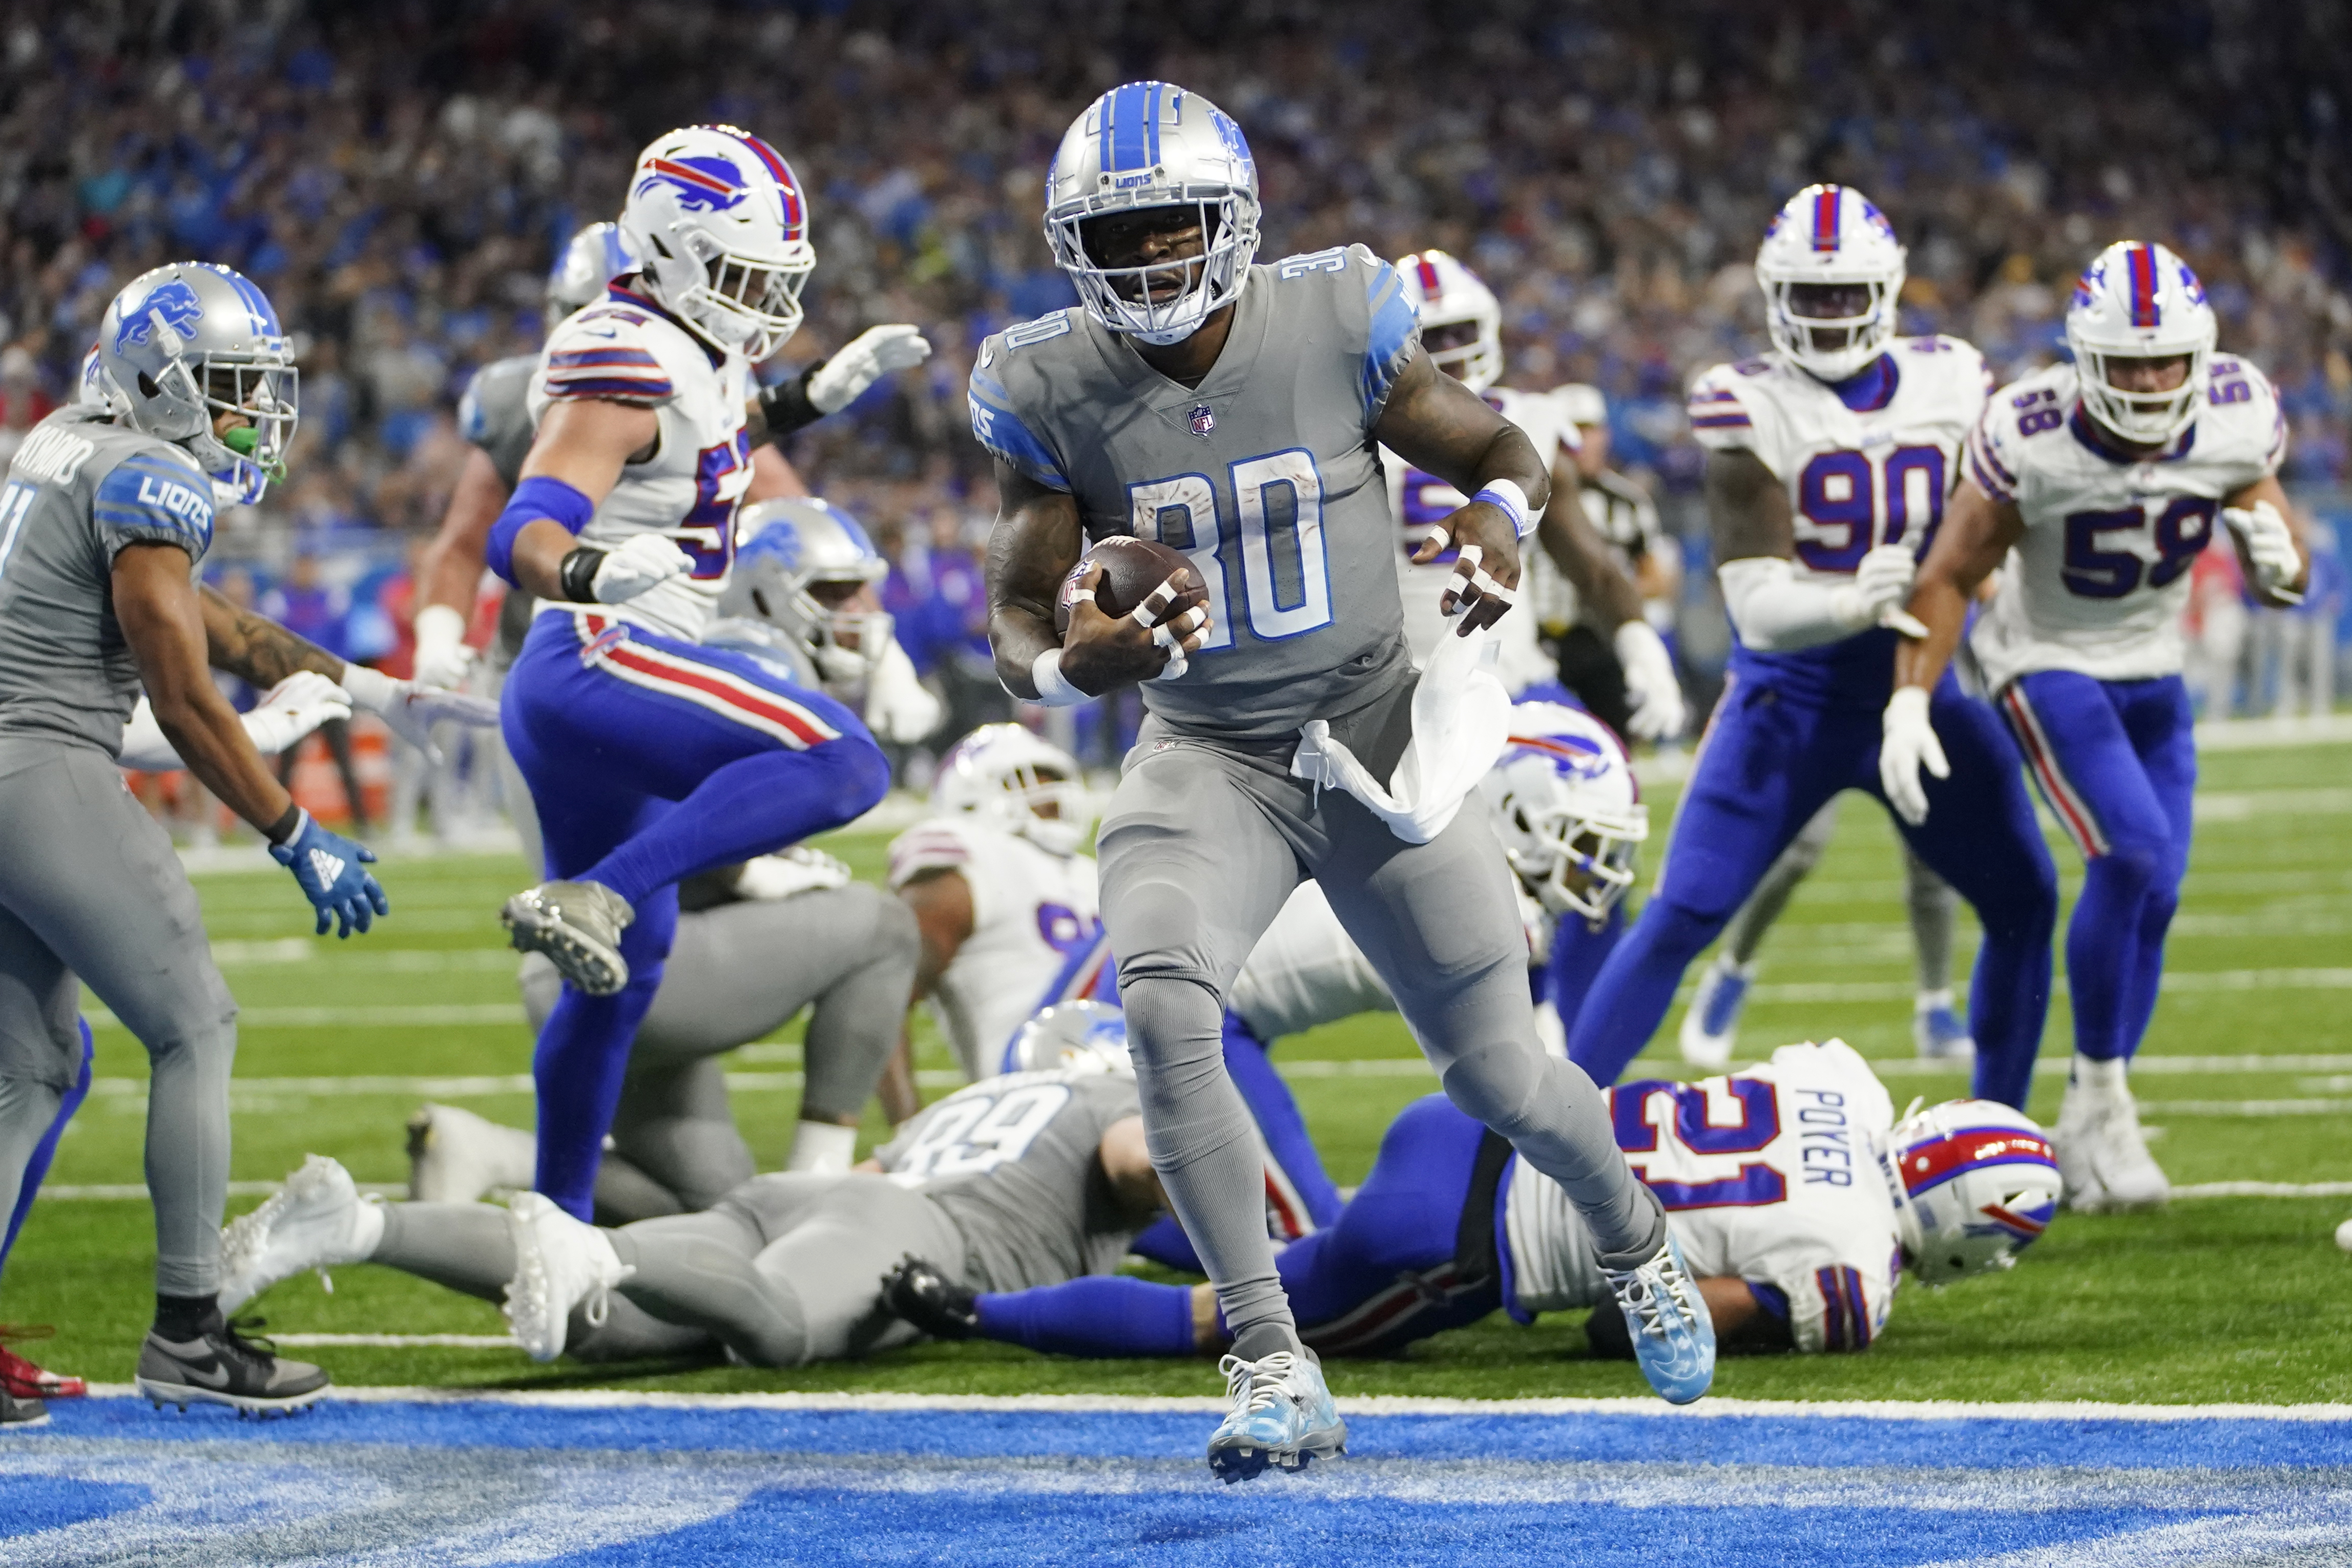 Detroit Lions lose on late field goal, 28-25 to Bills on Thanksgiving